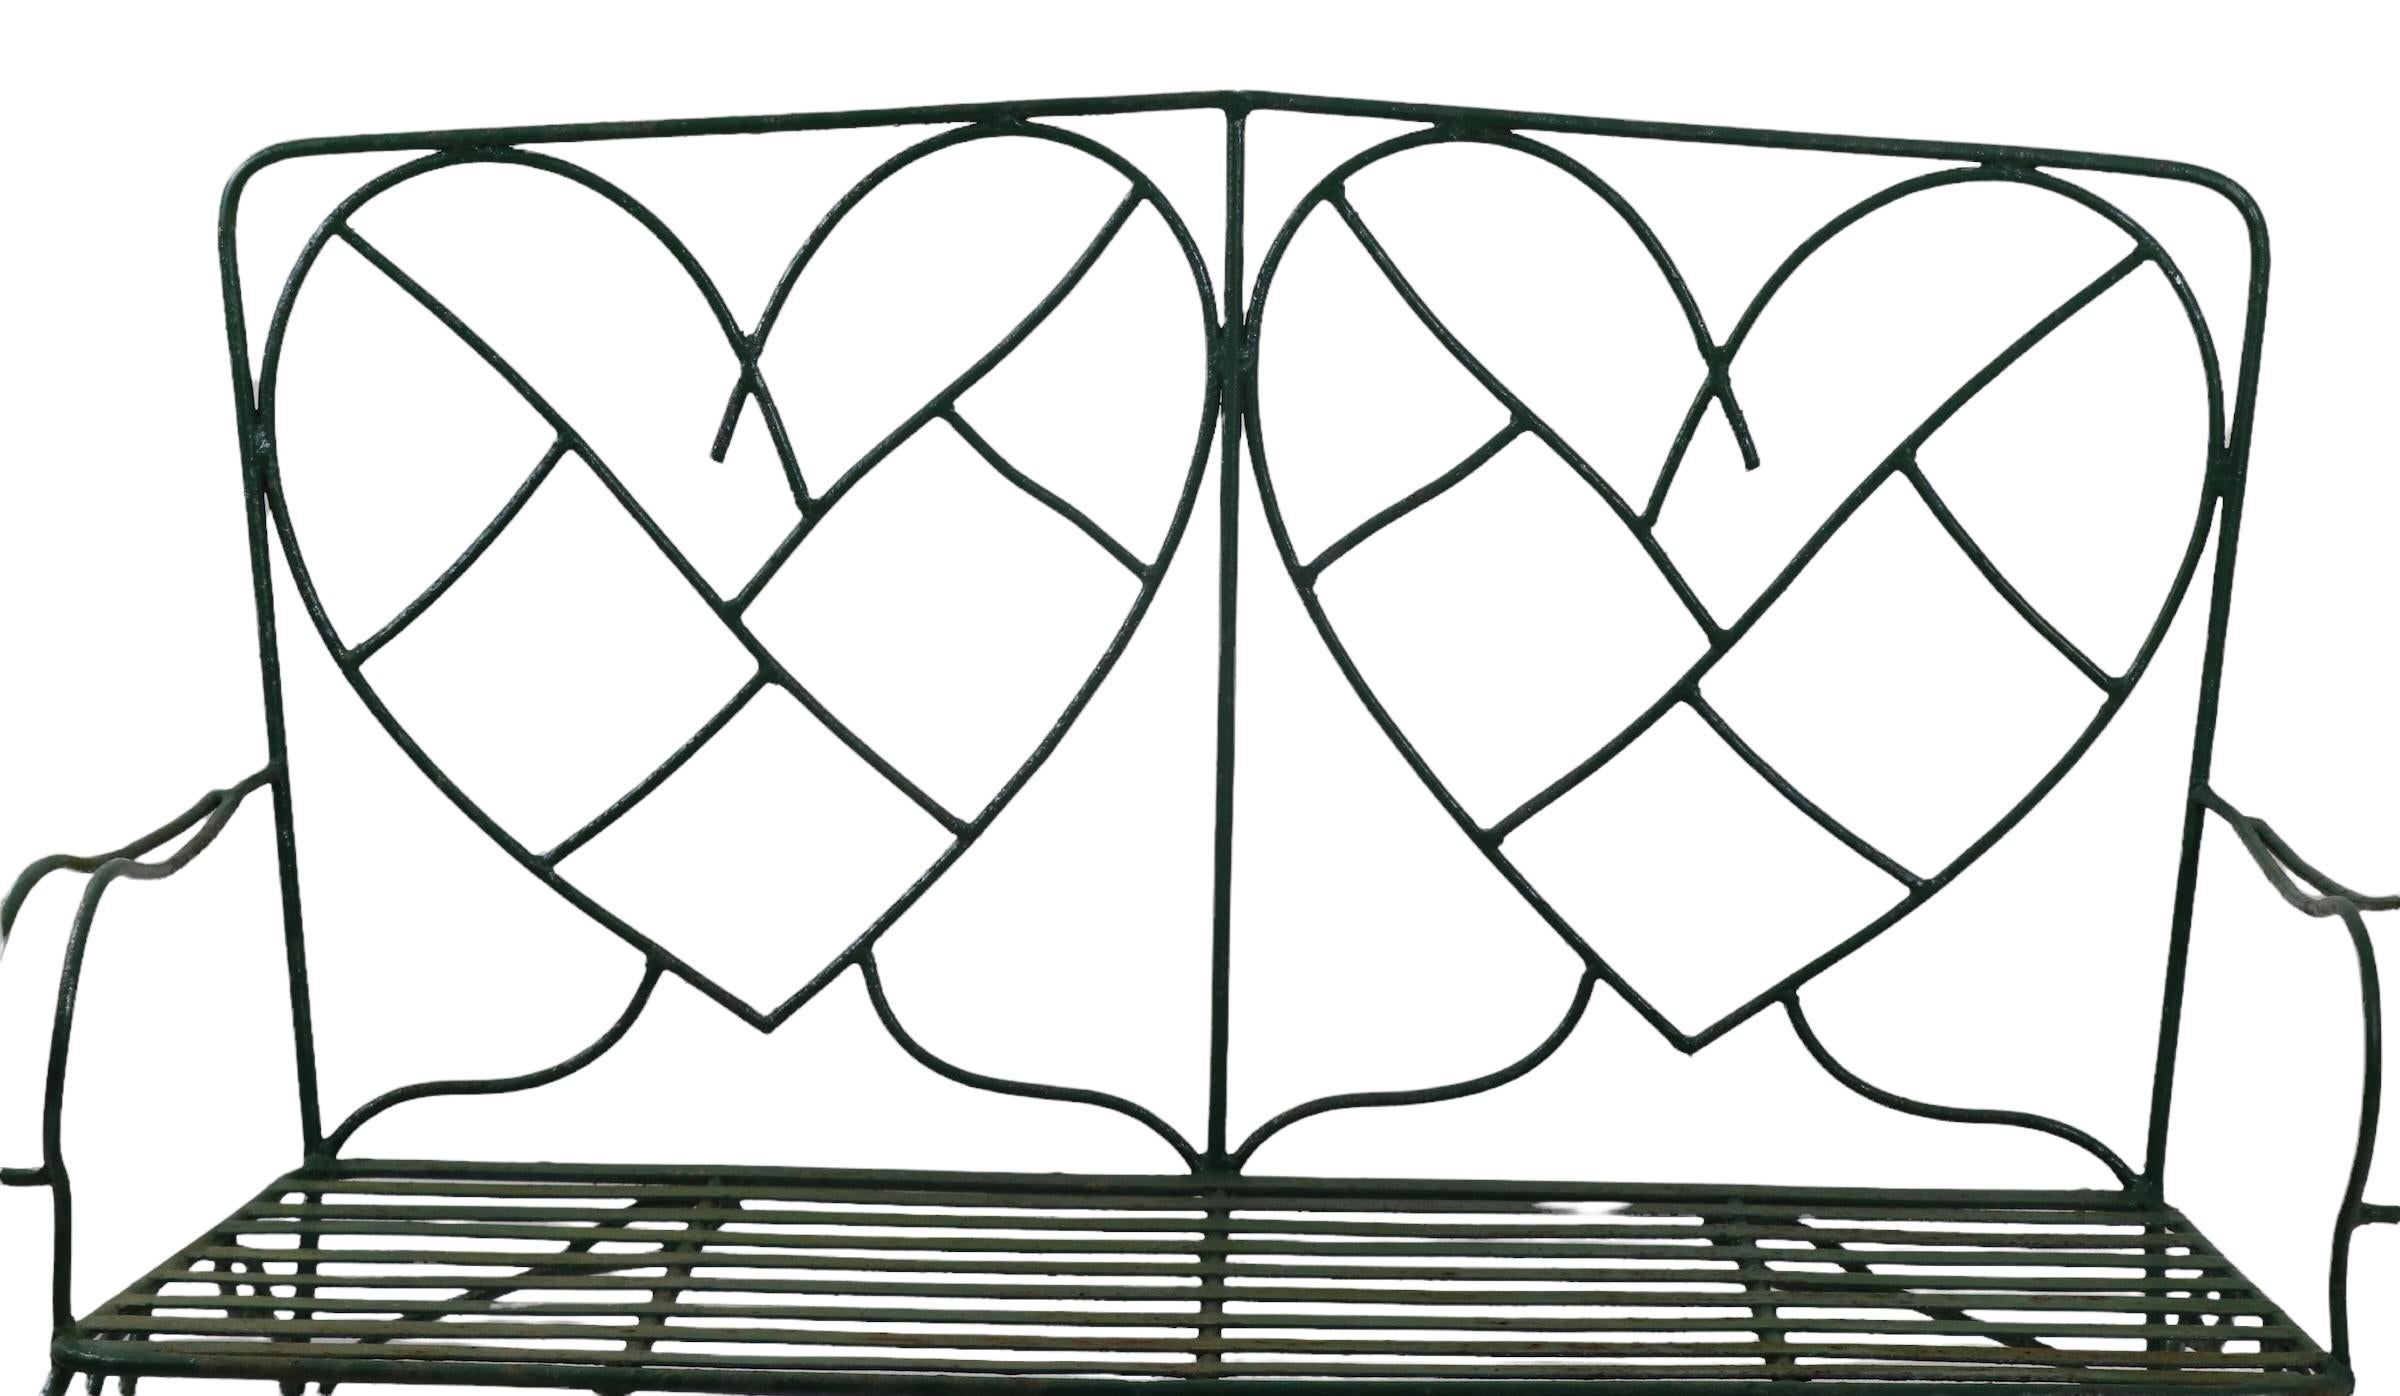 Hand Wrought Iron Settee Bench W Decorative Heart Shaped Metalwork Backrest  8